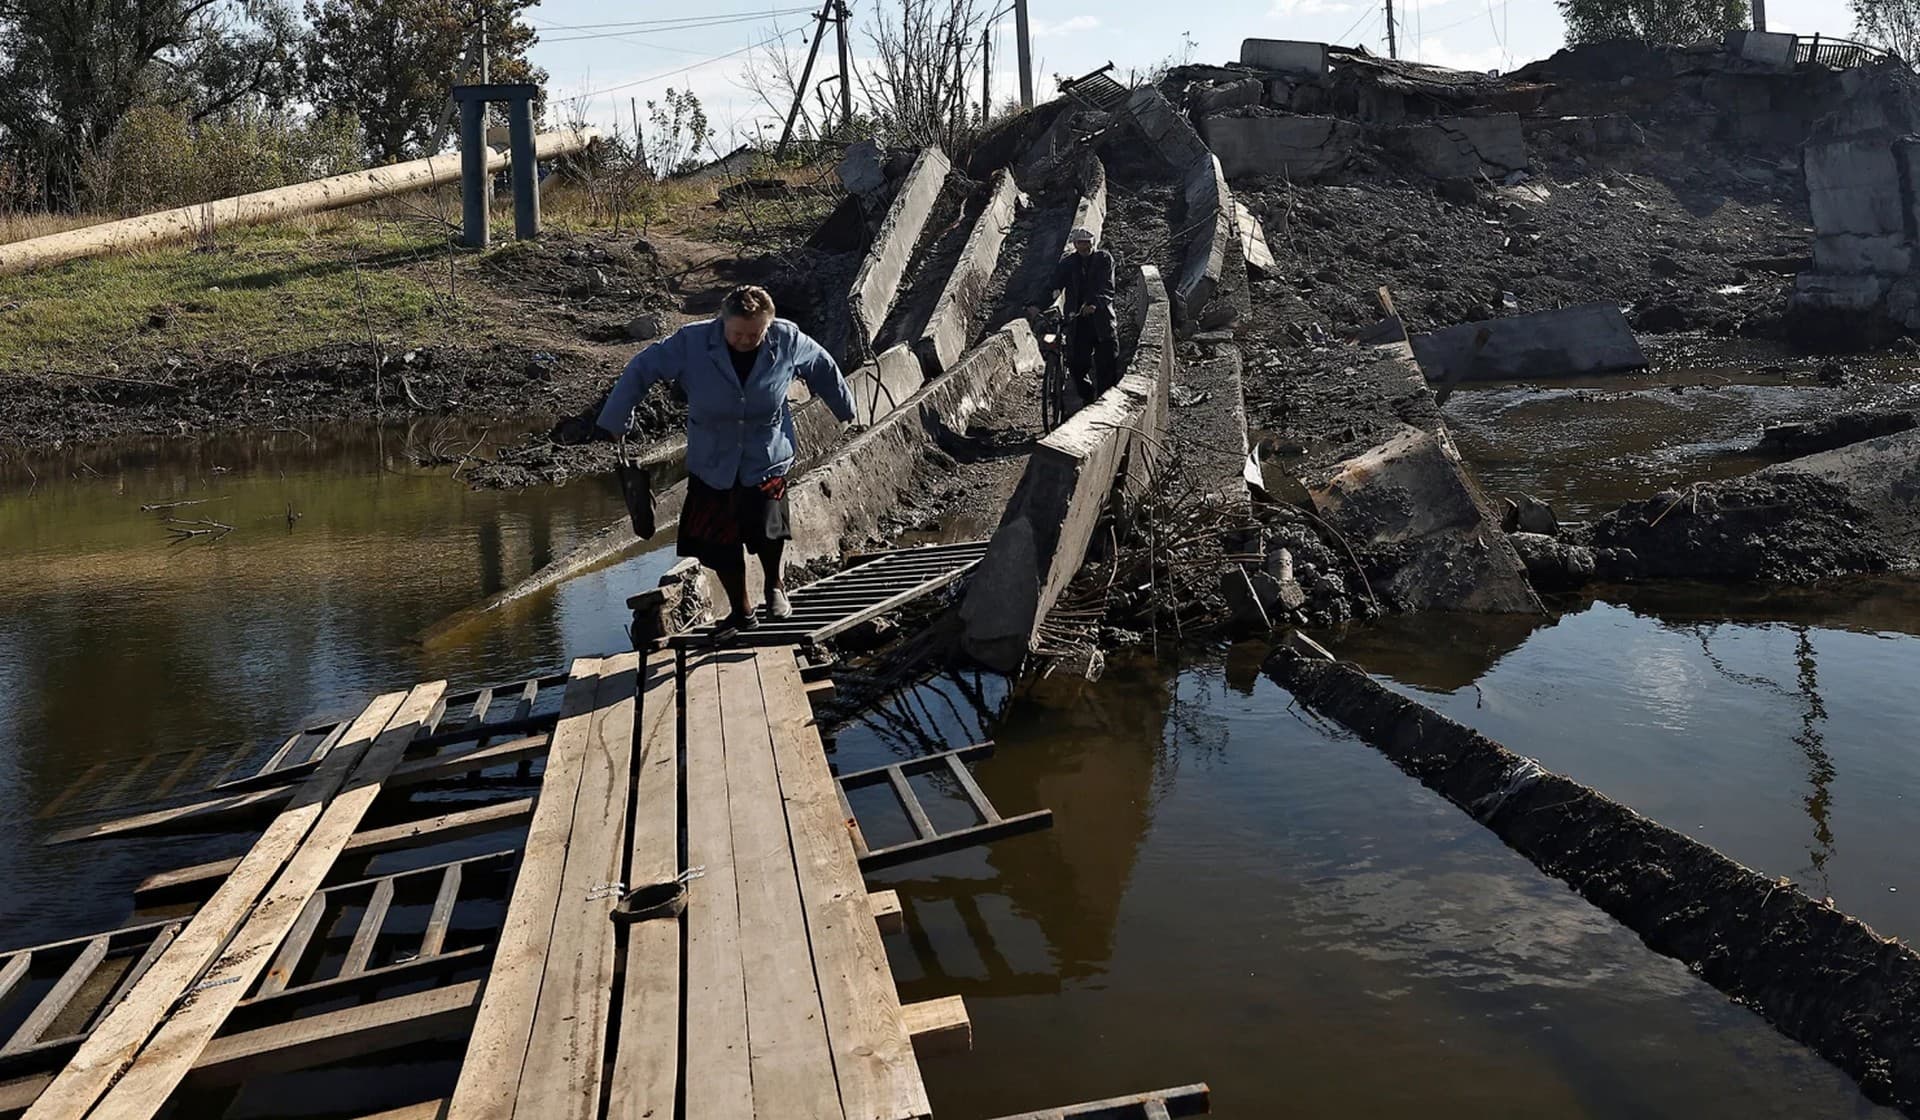 A local resident walks through the ruins of the bridge in Bakhmut